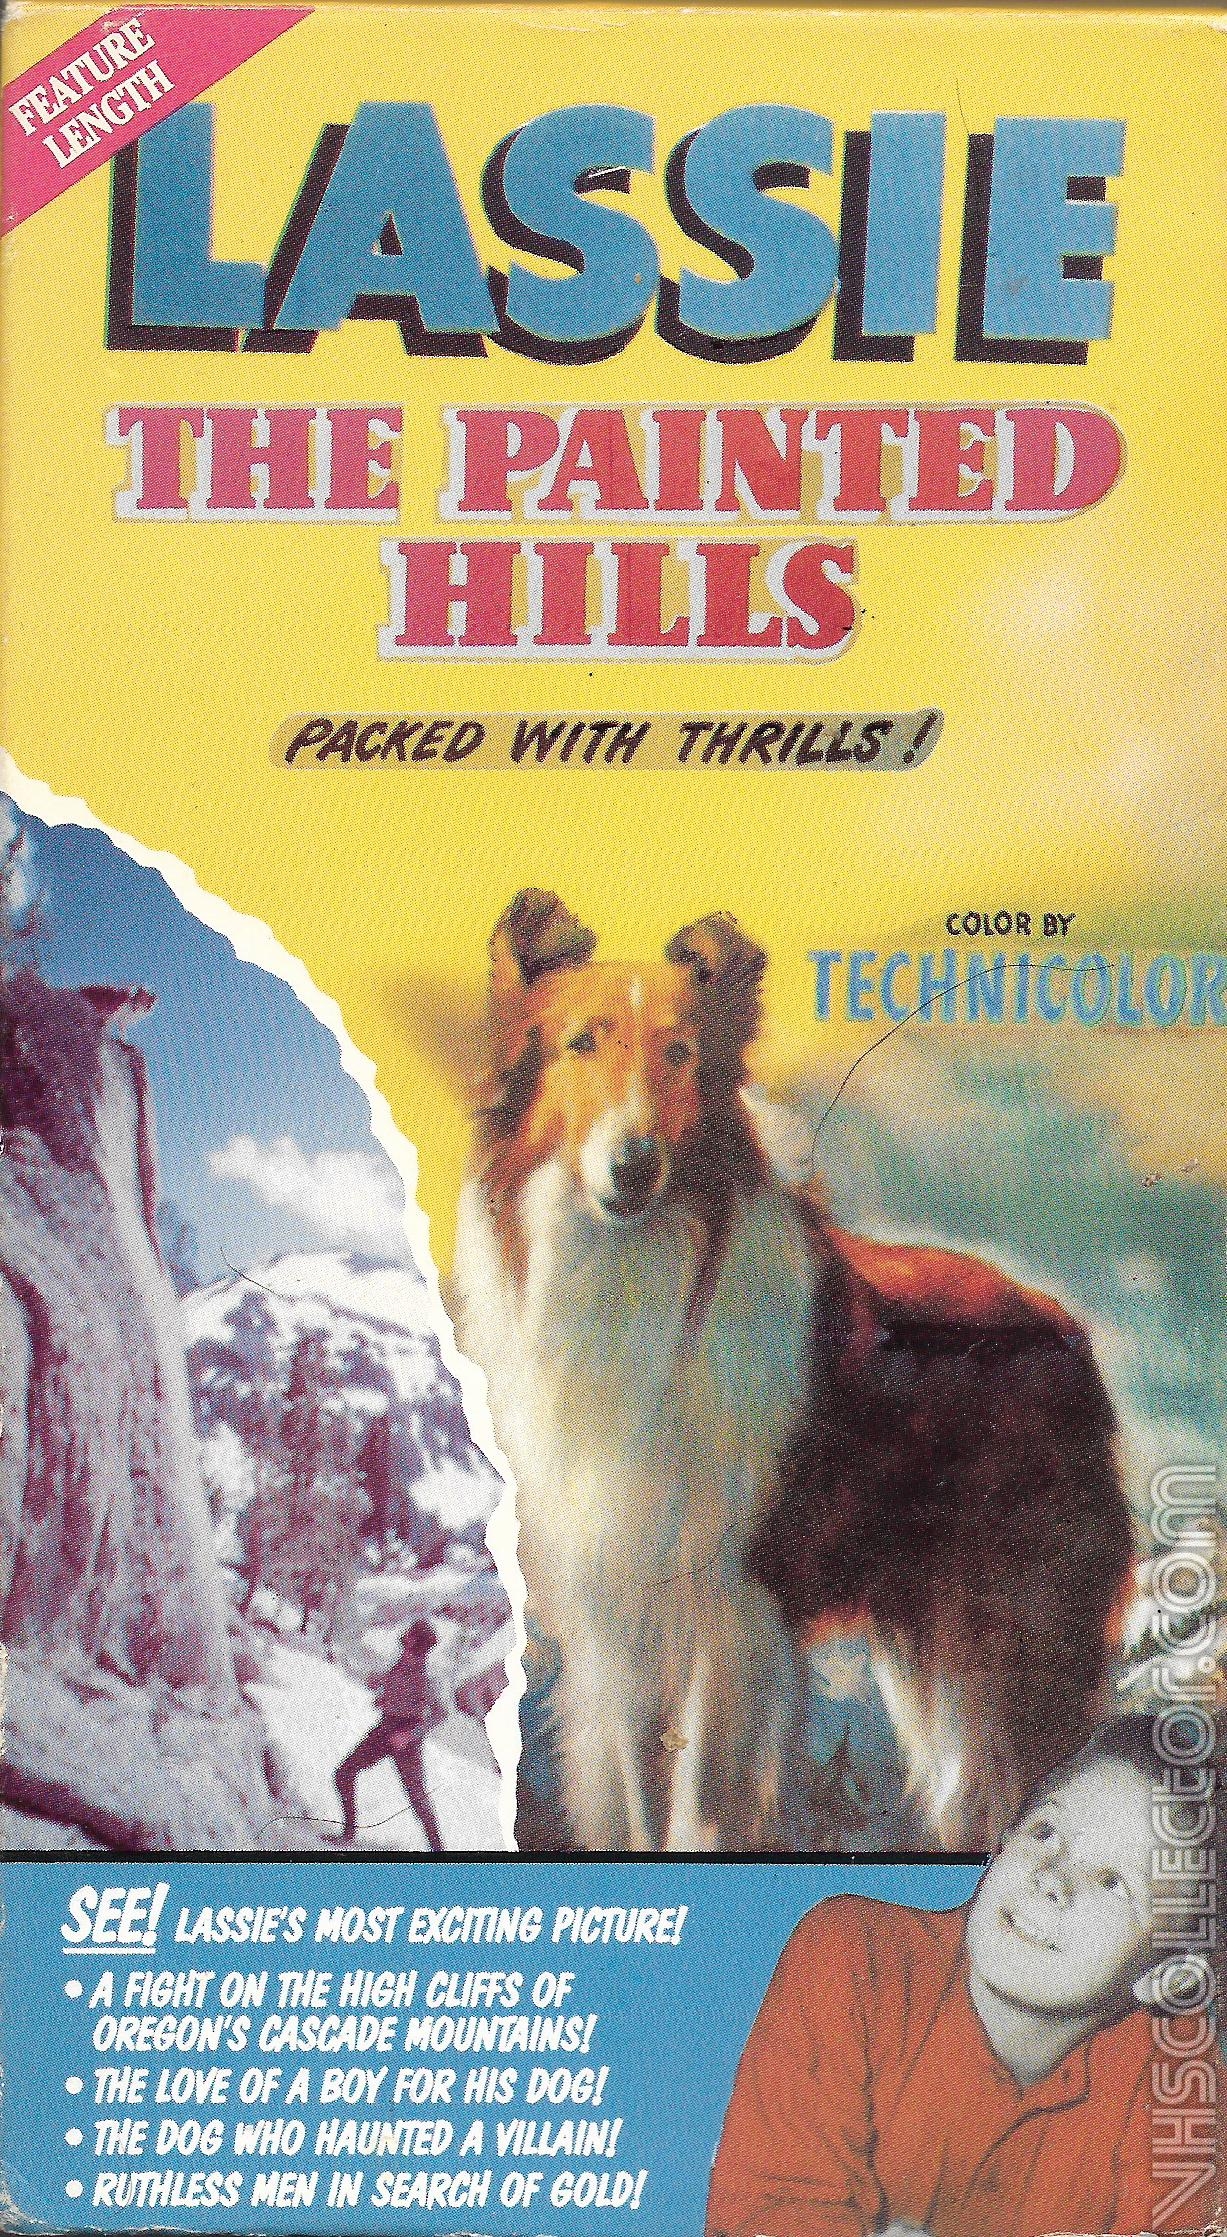 Lassie: The Painted Hills | VHSCollector.com